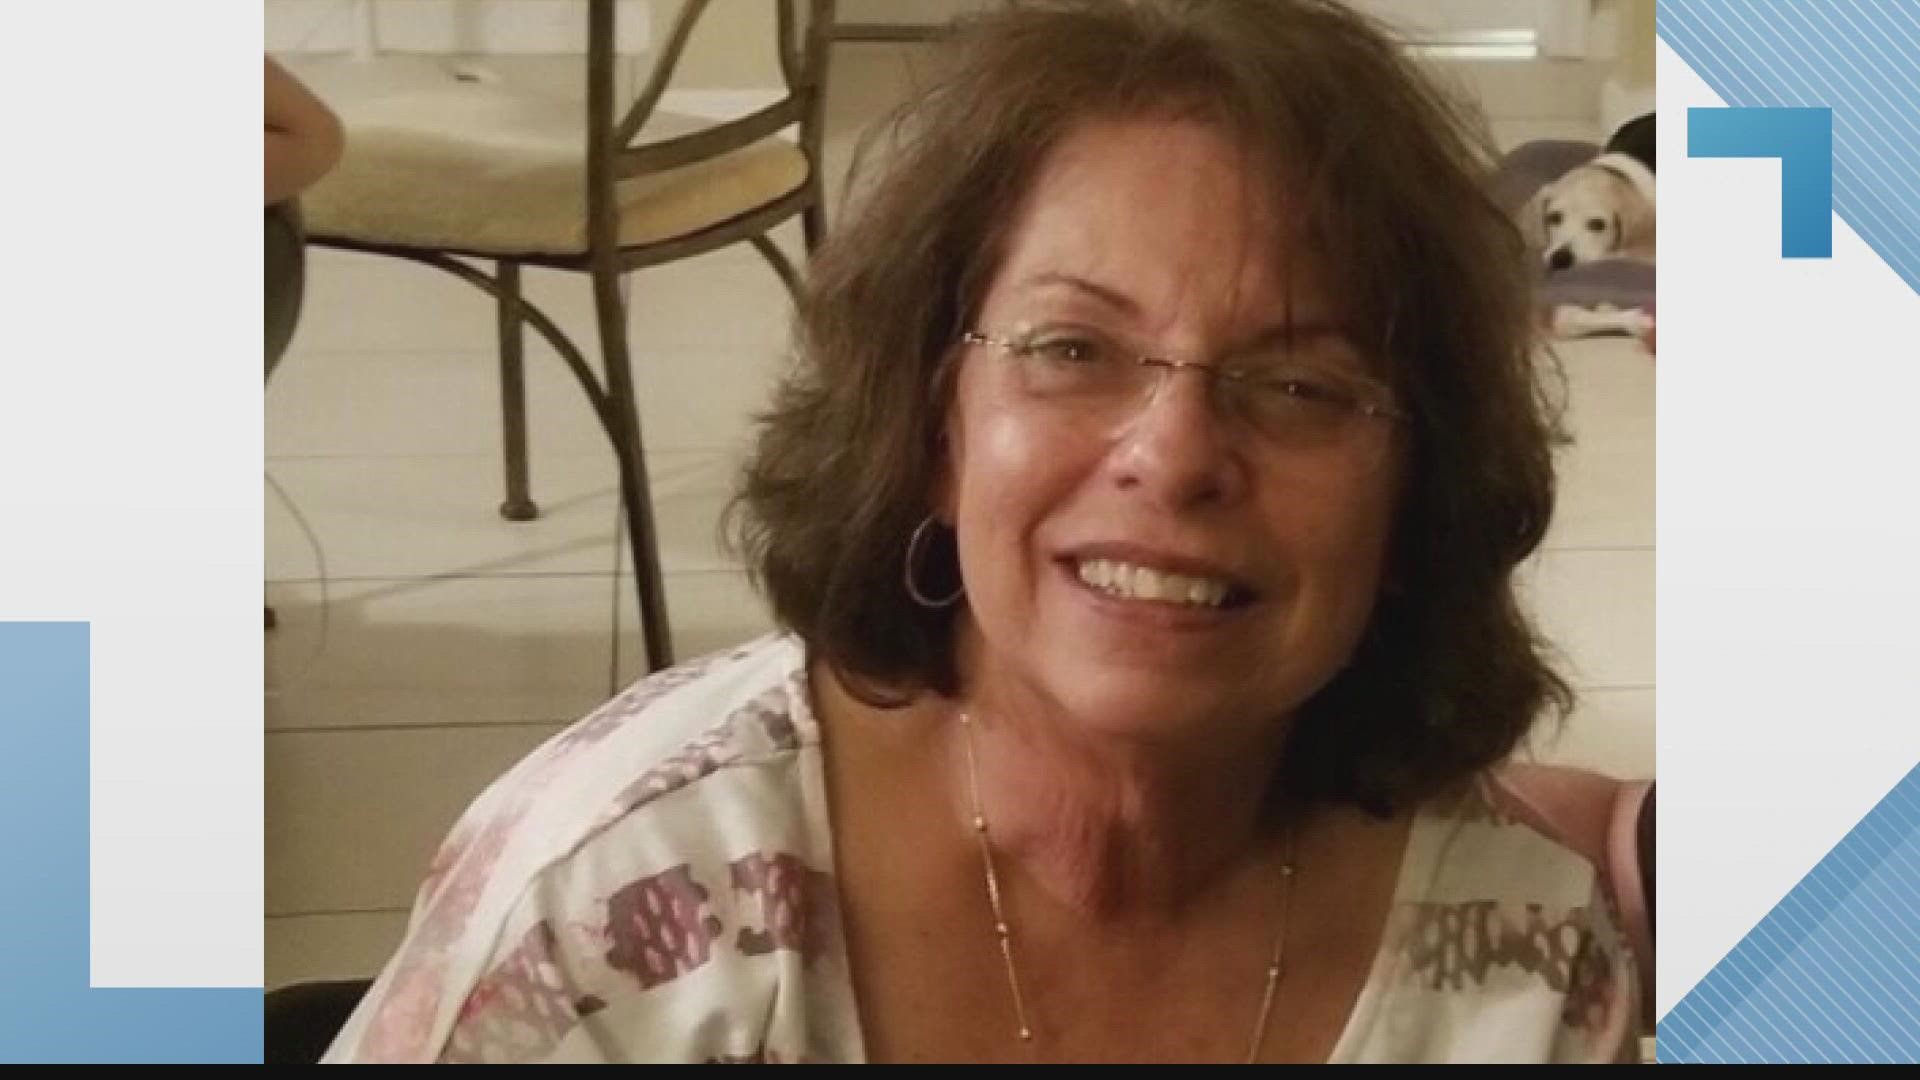 Neighbors said the victim, Eileen Schnitker, was a sweet woman and a retired nurse.